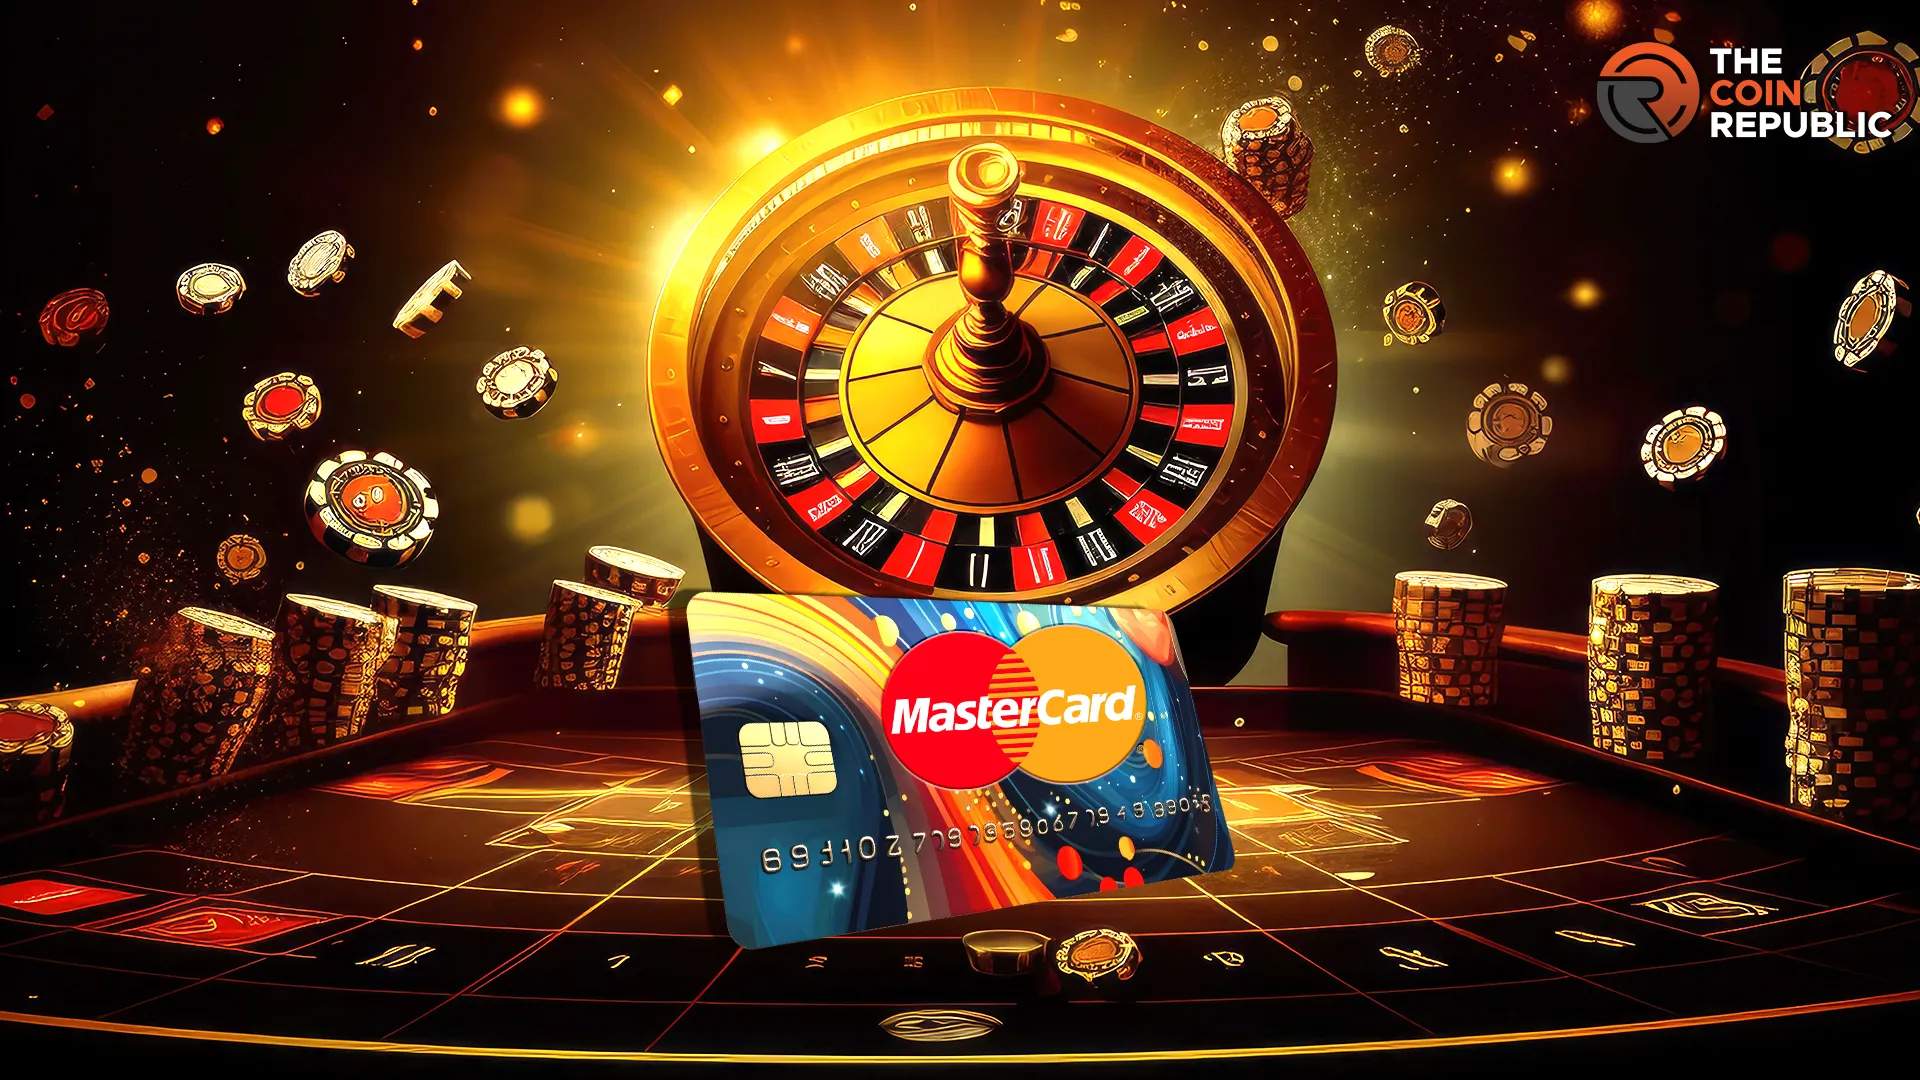 How Is Mastercard Helping Online Betting In Mastercard Casinos?